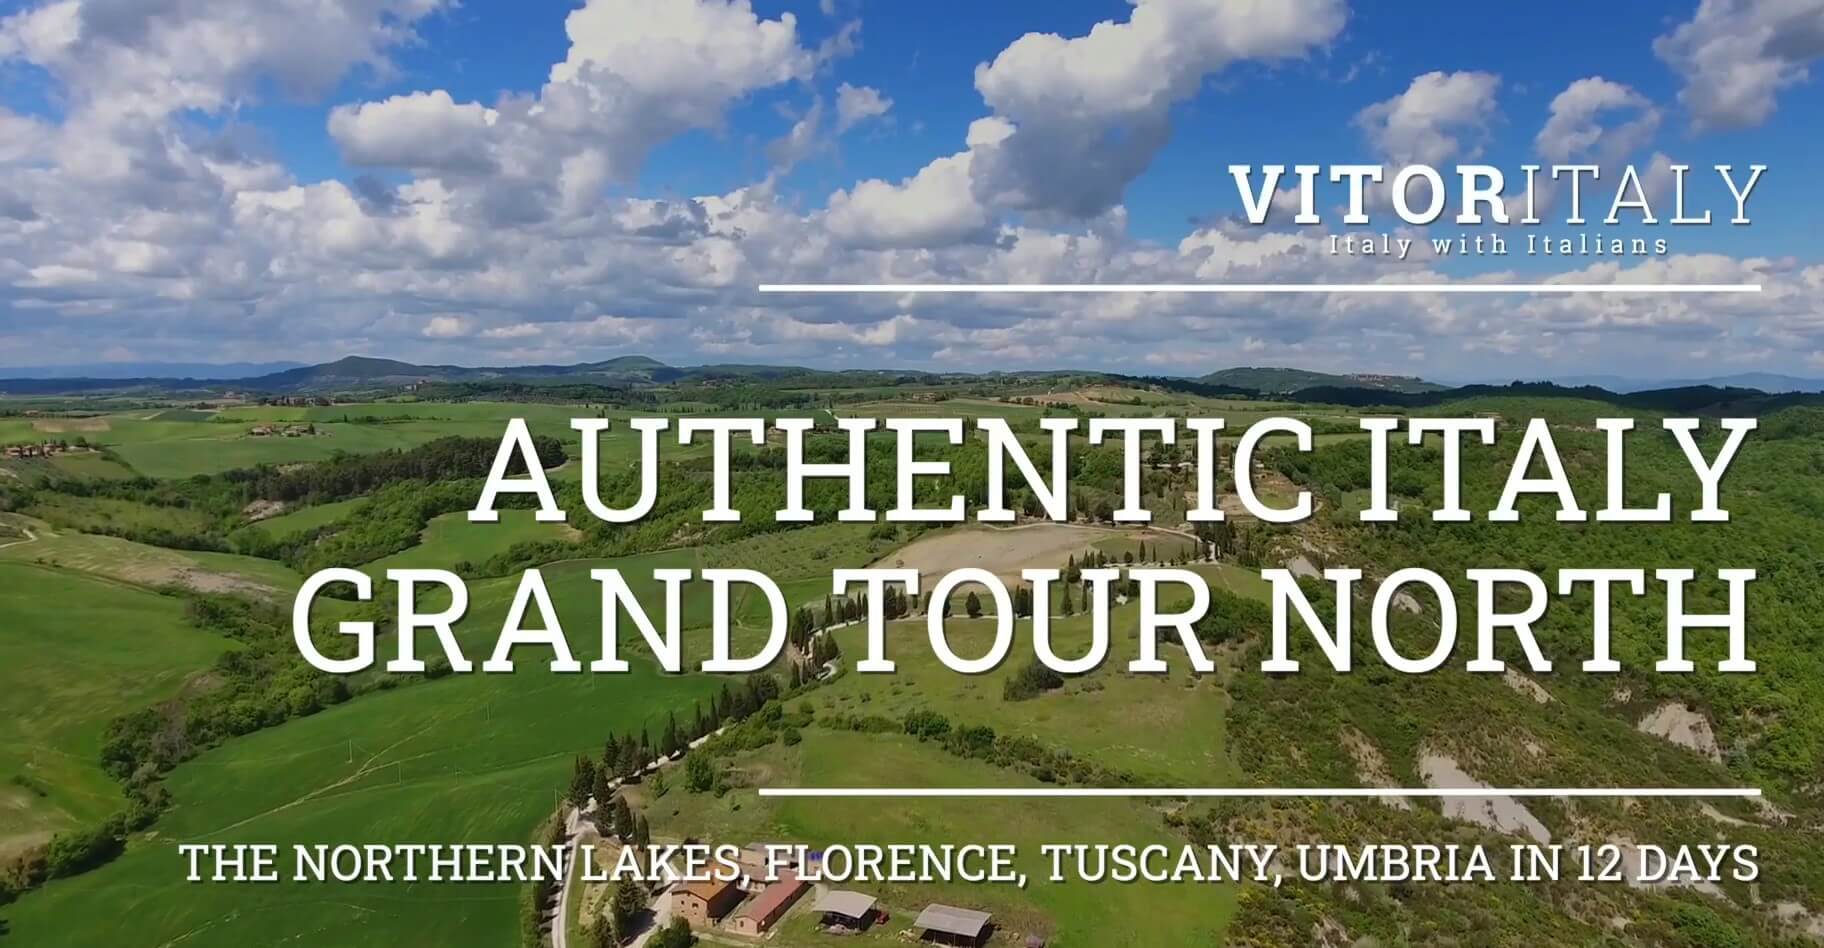 AUTHENTIC ITALY GRAND TOUR NORTH - The Northern Lakes, Emilia, Tuscany, Umbria in 12 days